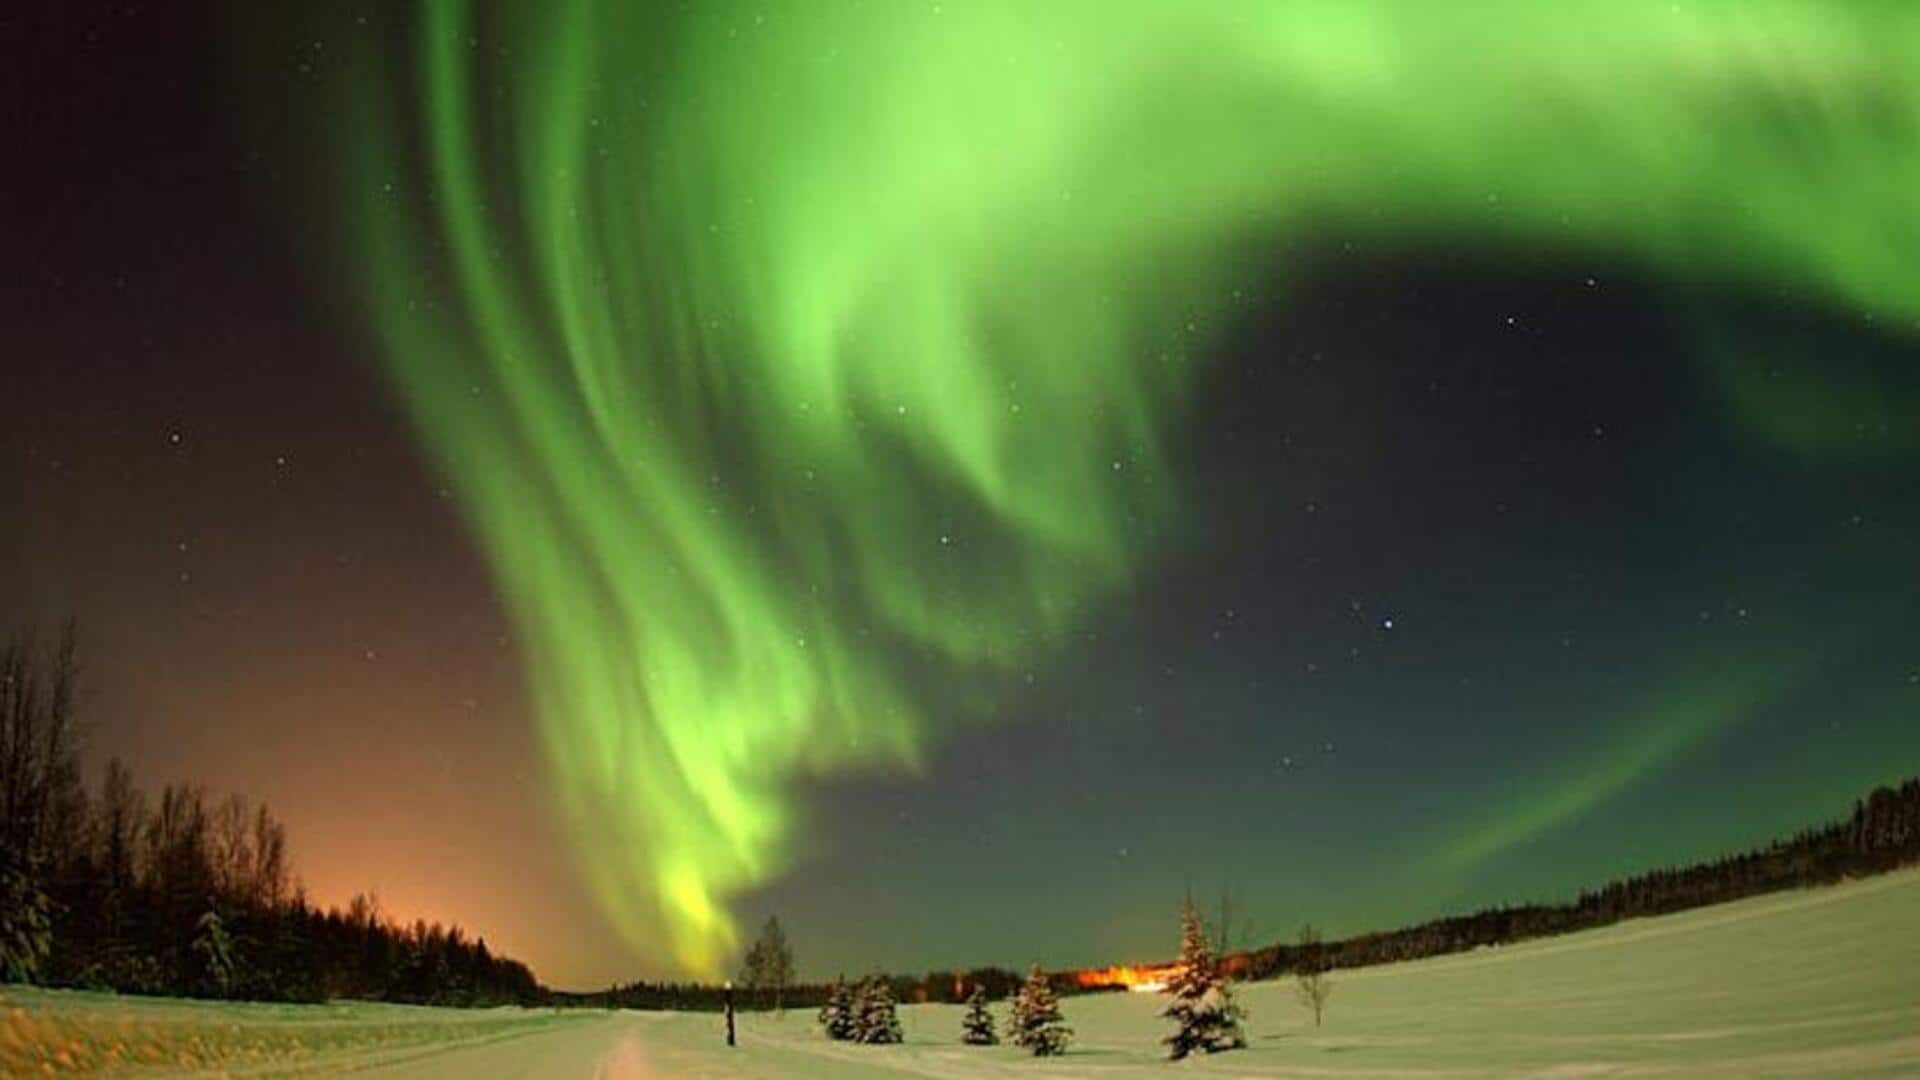 Marvel at Yellowknife's northern lights and ice art